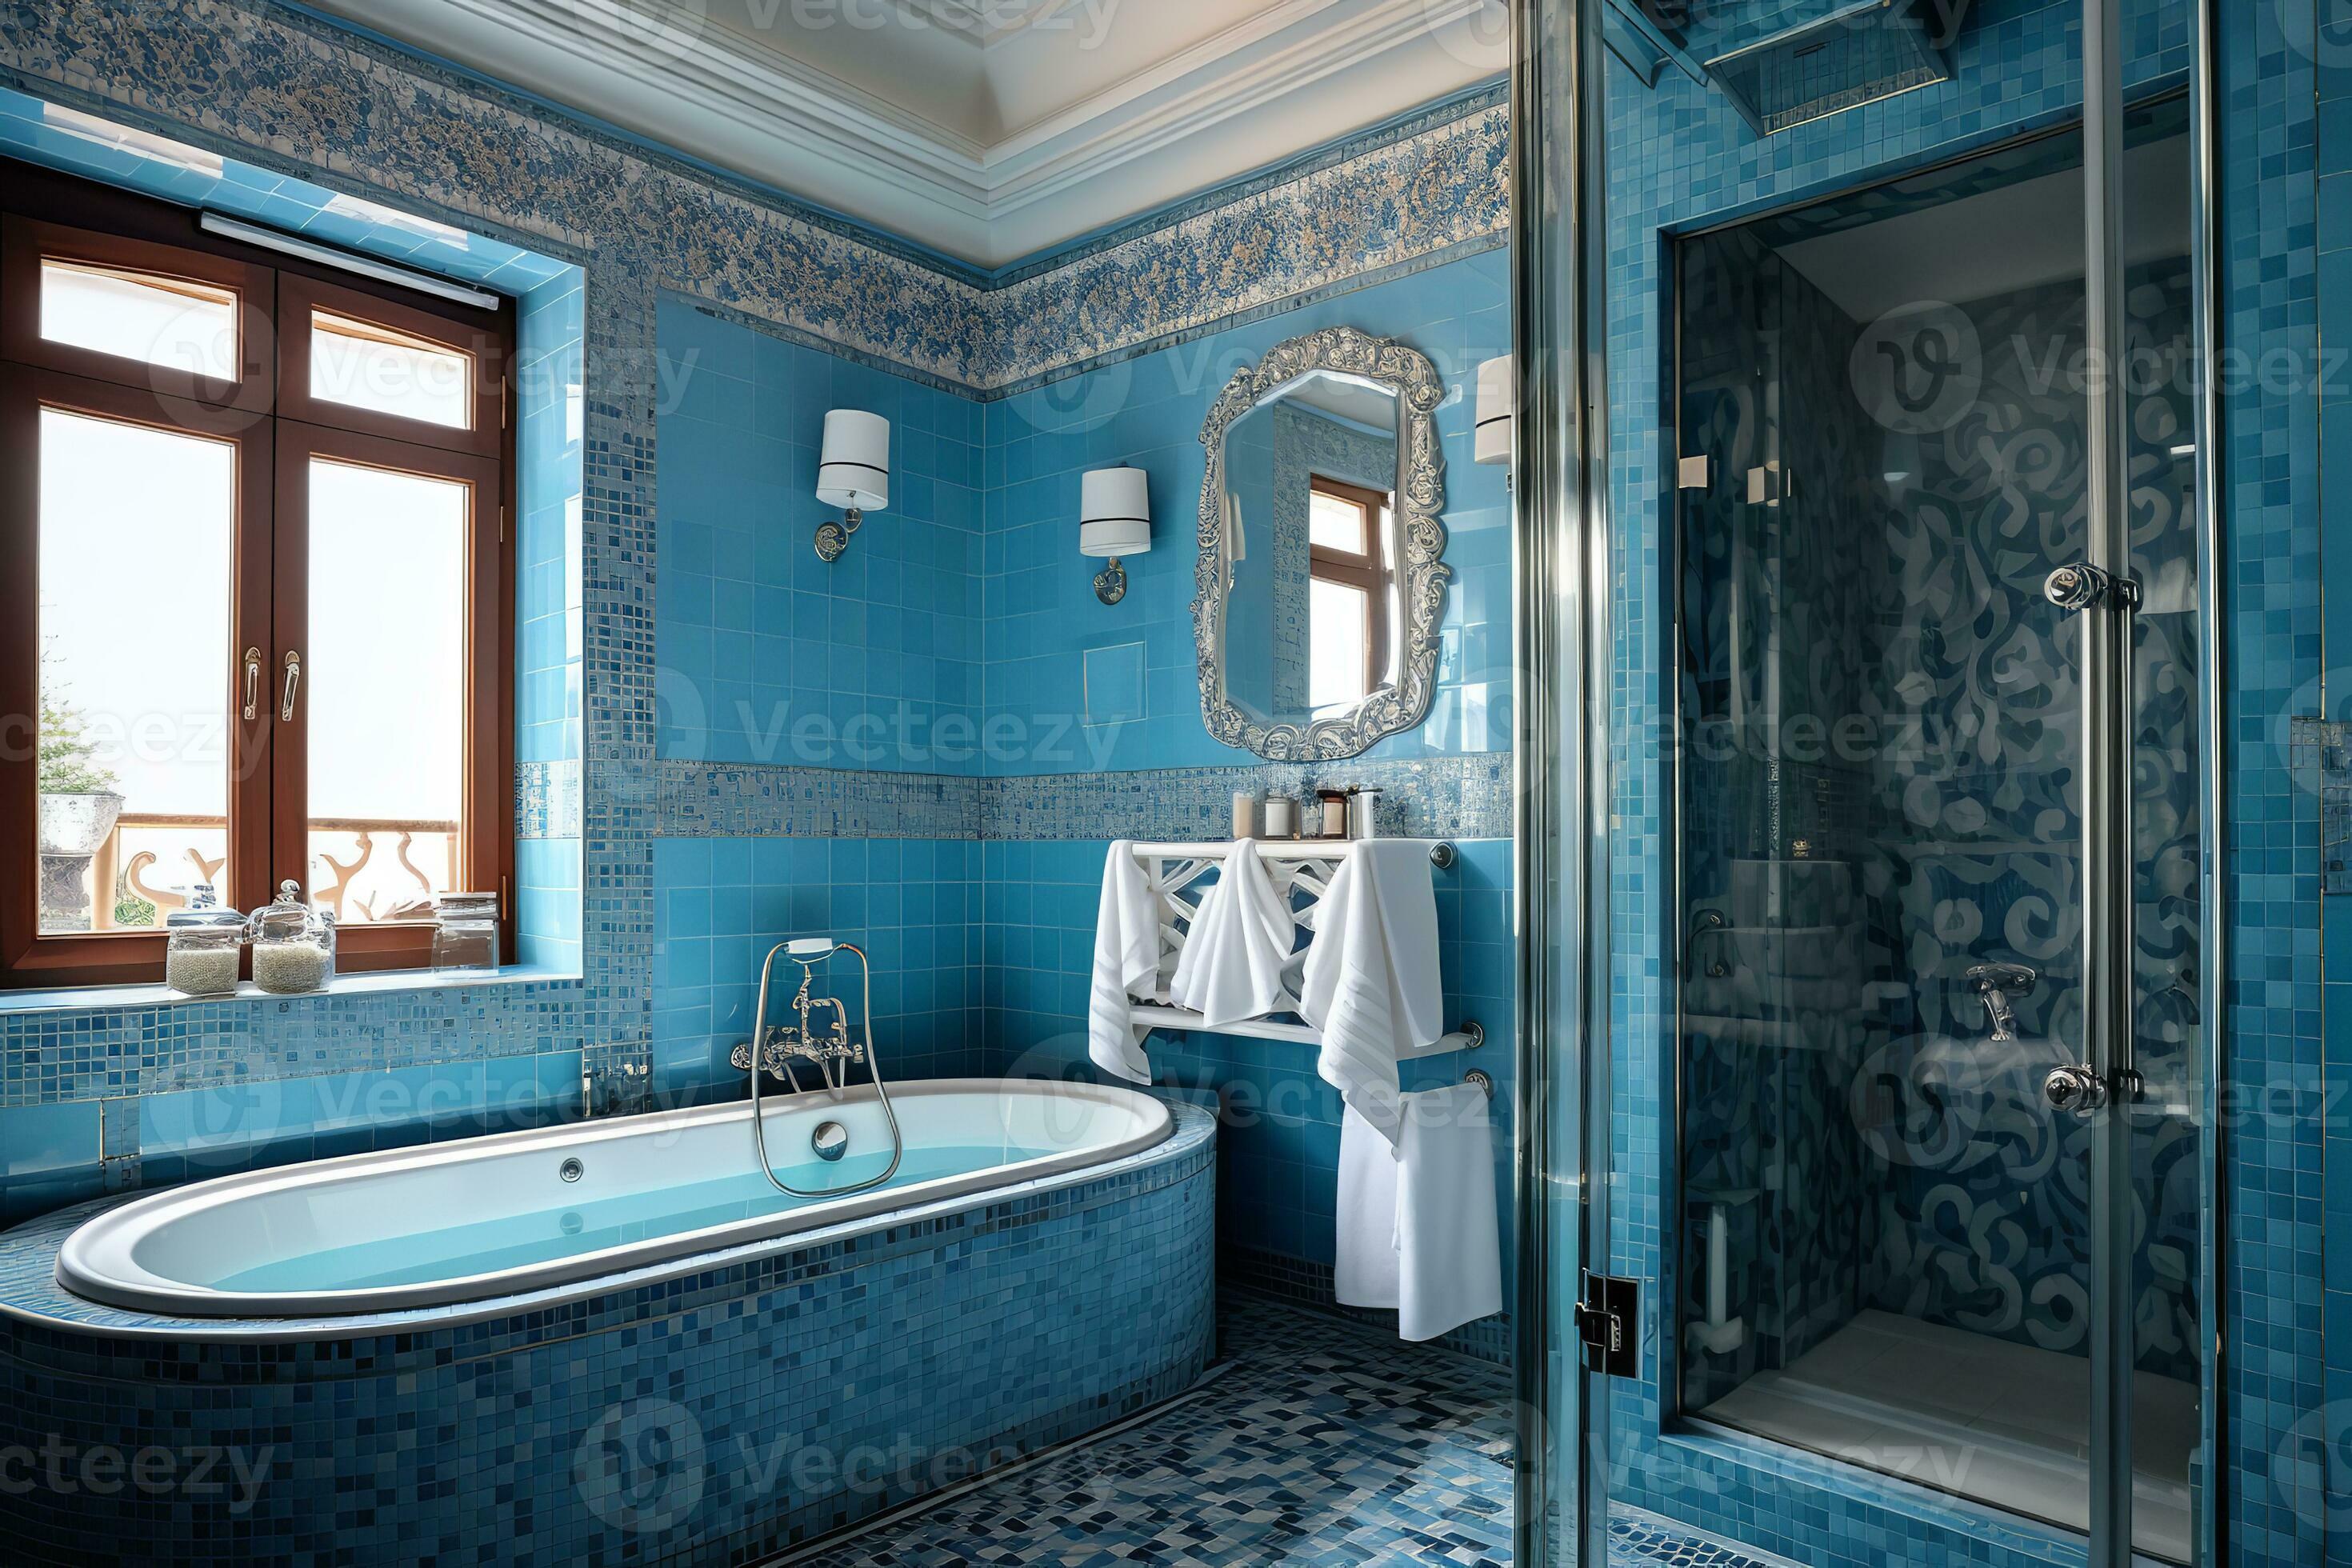 https://static.vecteezy.com/system/resources/previews/033/858/888/large_2x/a-stunning-blue-bathroom-with-a-freestanding-bathtub-walk-in-shower-and-double-sinks-the-bathtub-is-positioned-in-the-center-of-the-room-with-a-large-window-behind-it-that-lets-in-natural-light-photo.jpeg